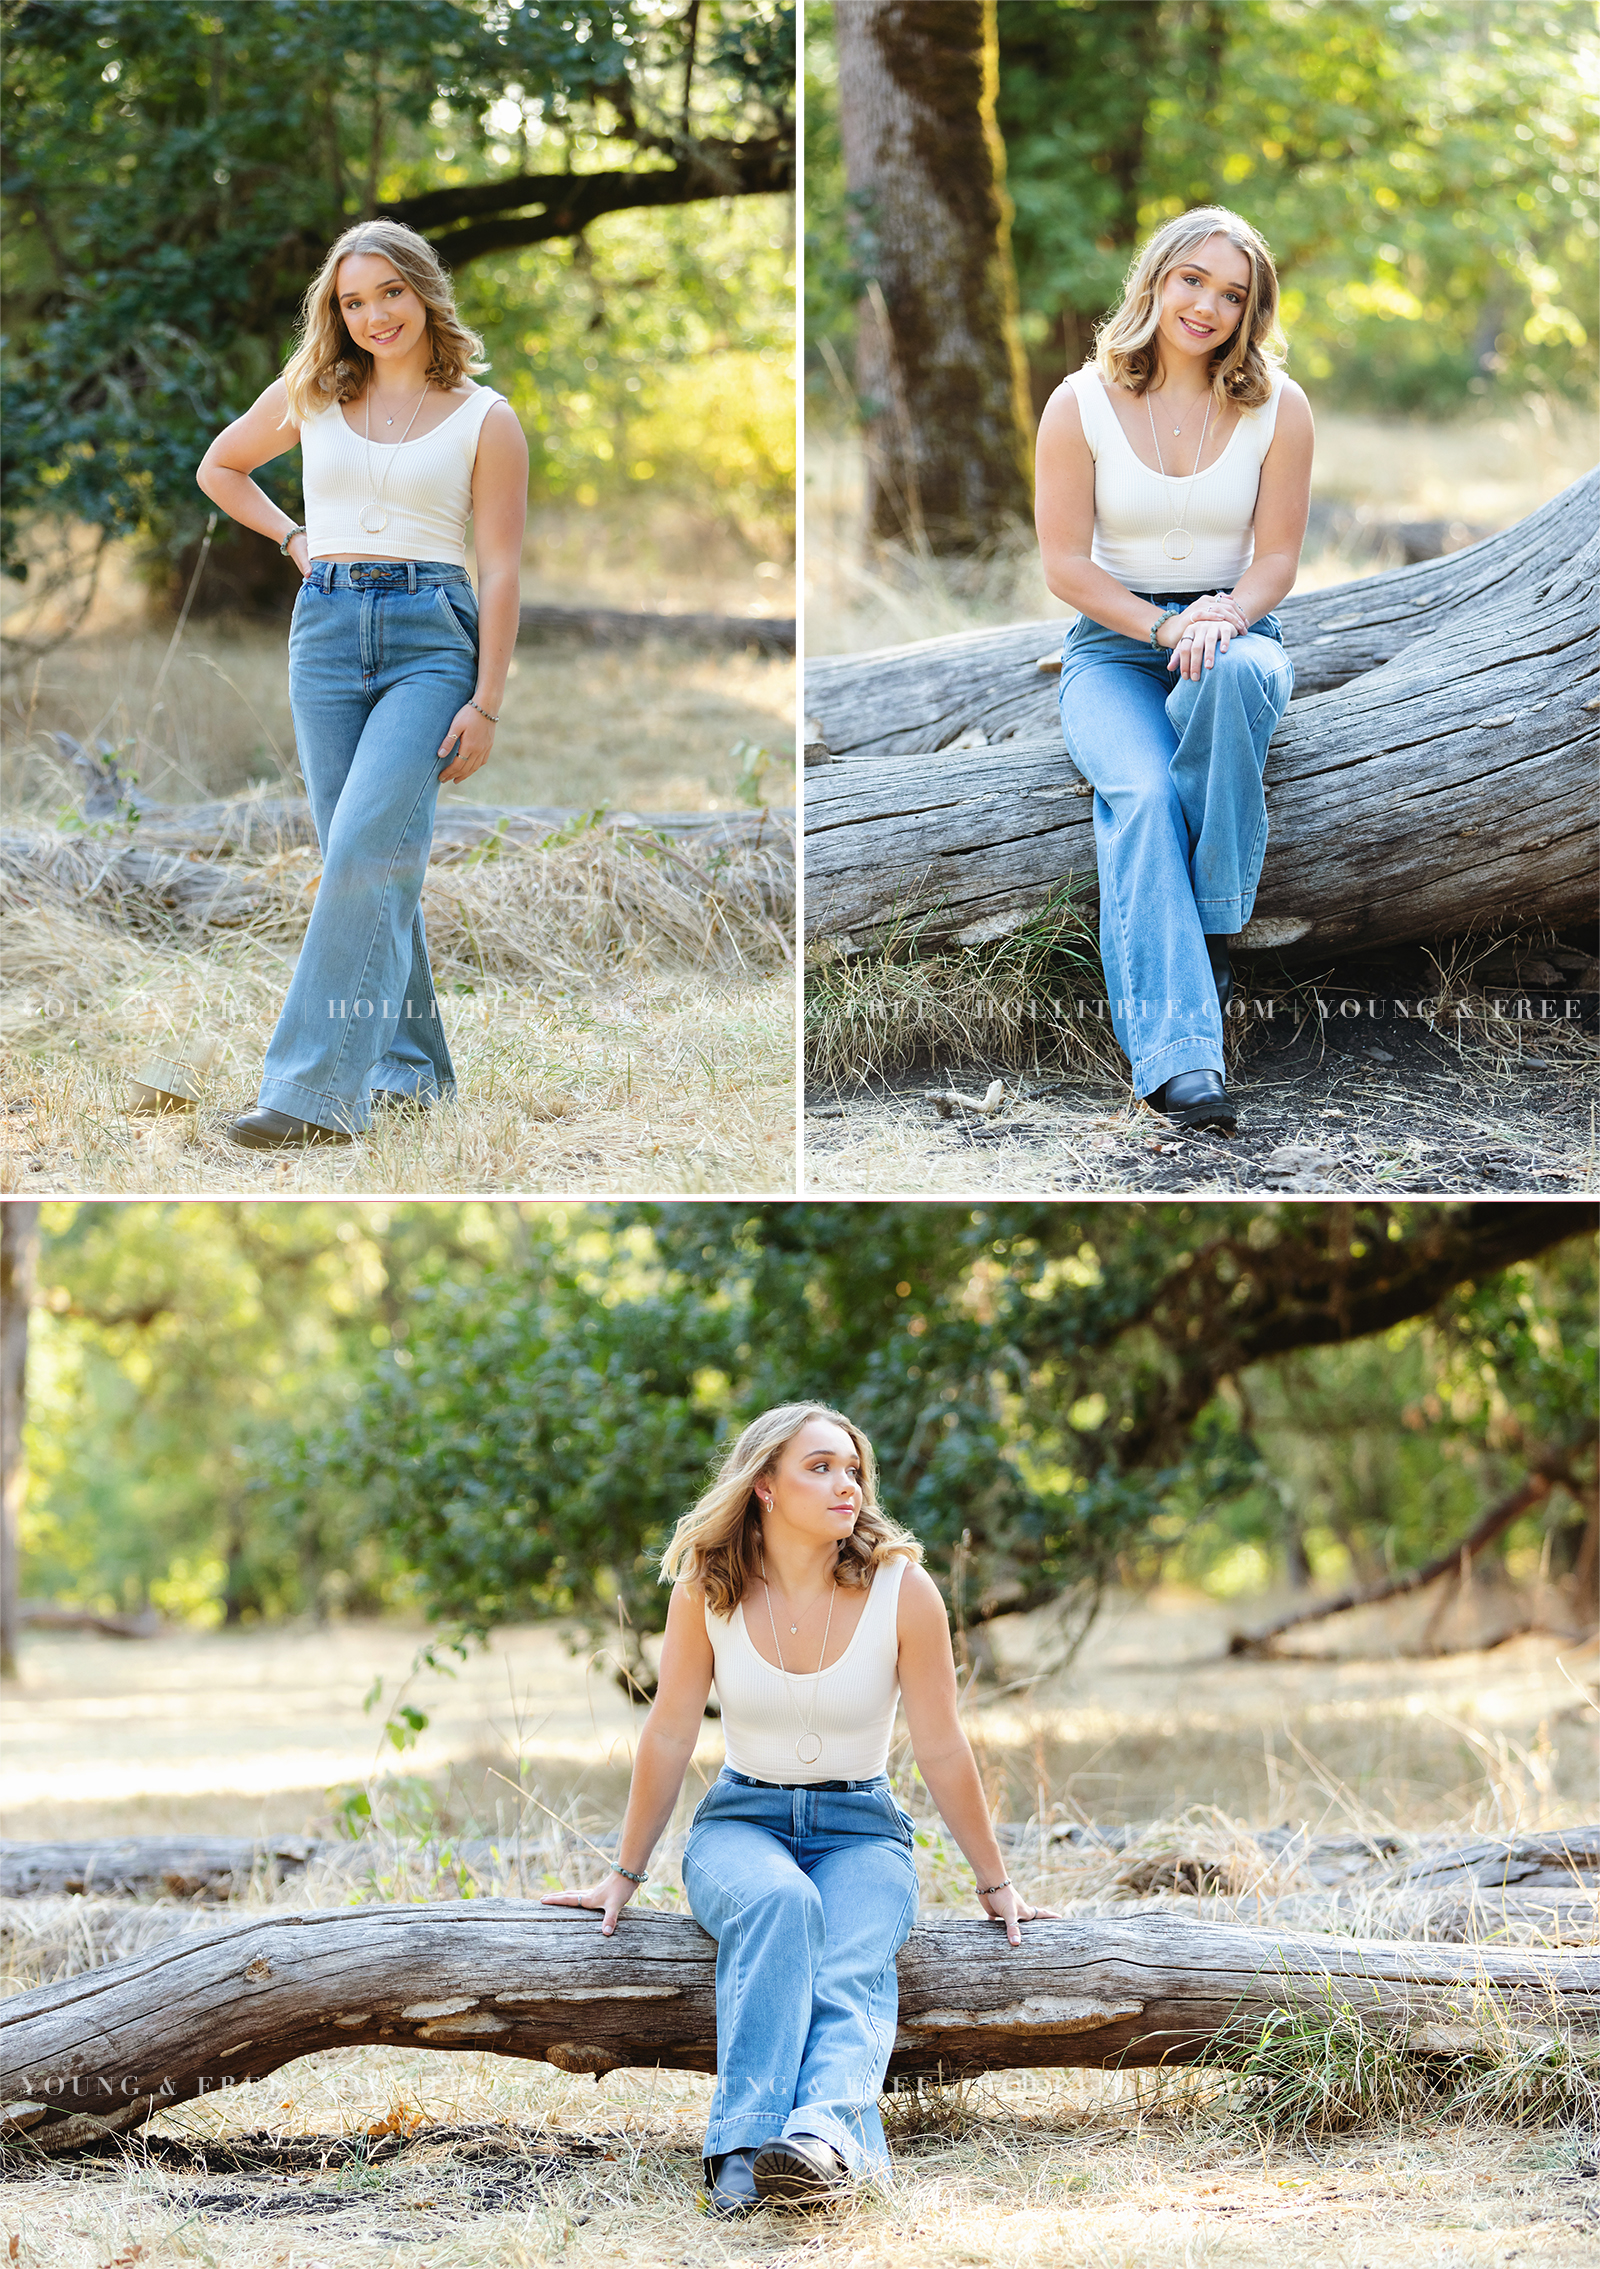 Summer senior pictures in in a natural park with Corvallis Oregon high school senior, Sierra, by Holli True Photography